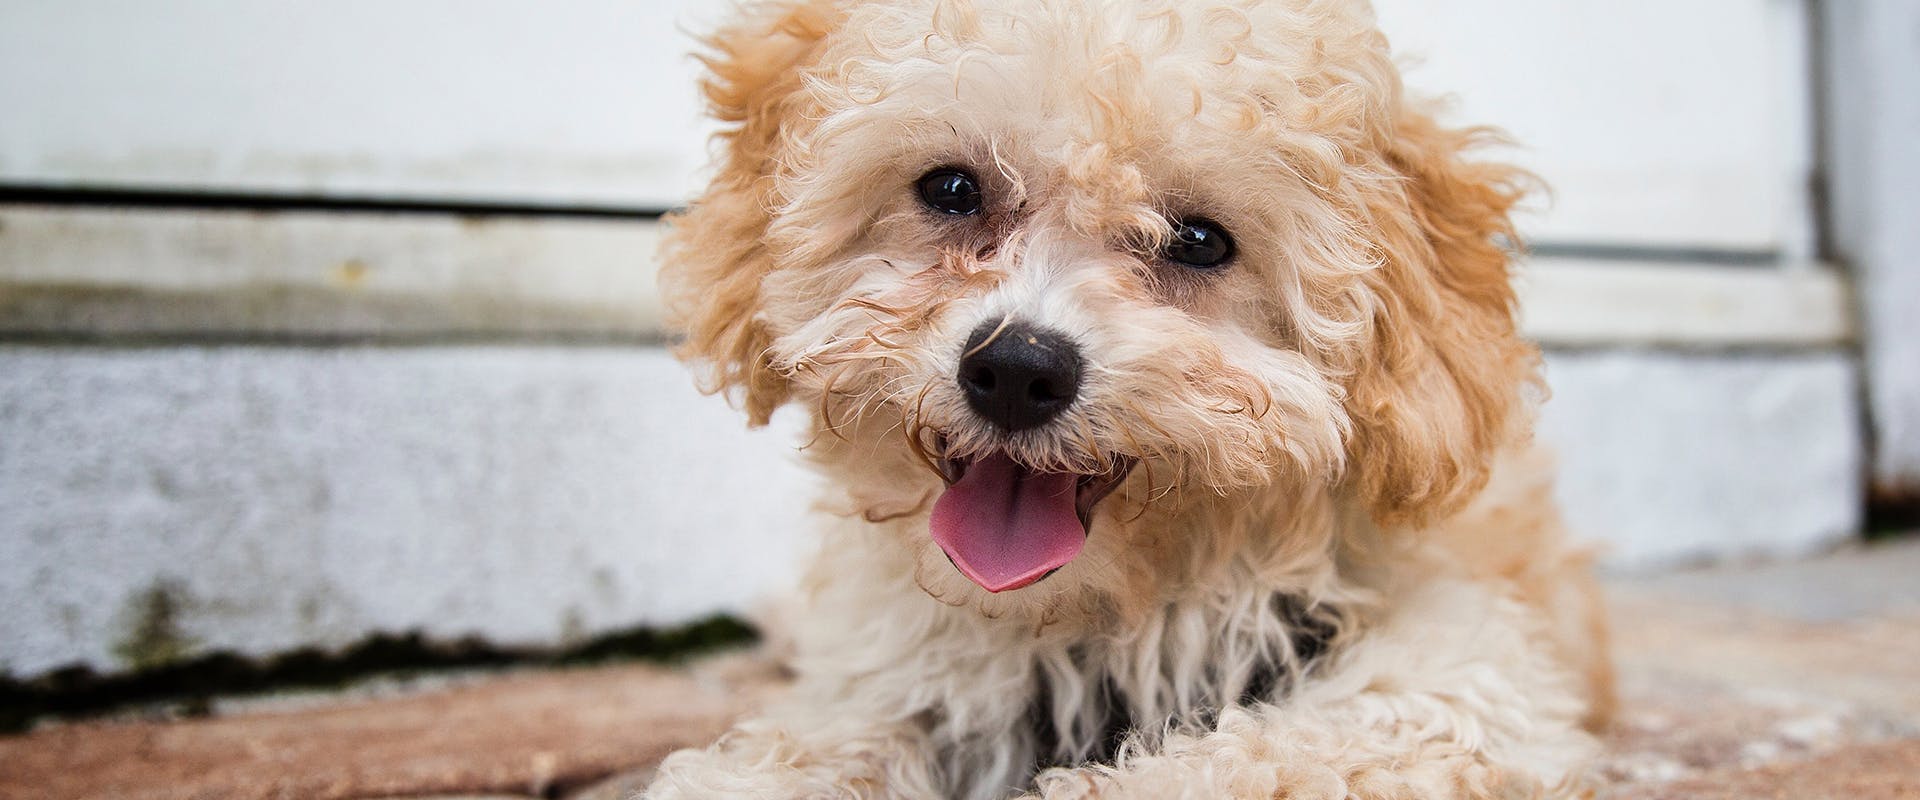 A cute, happy looking Poochon puppy sitting on the ground outside, looking directly at the camera